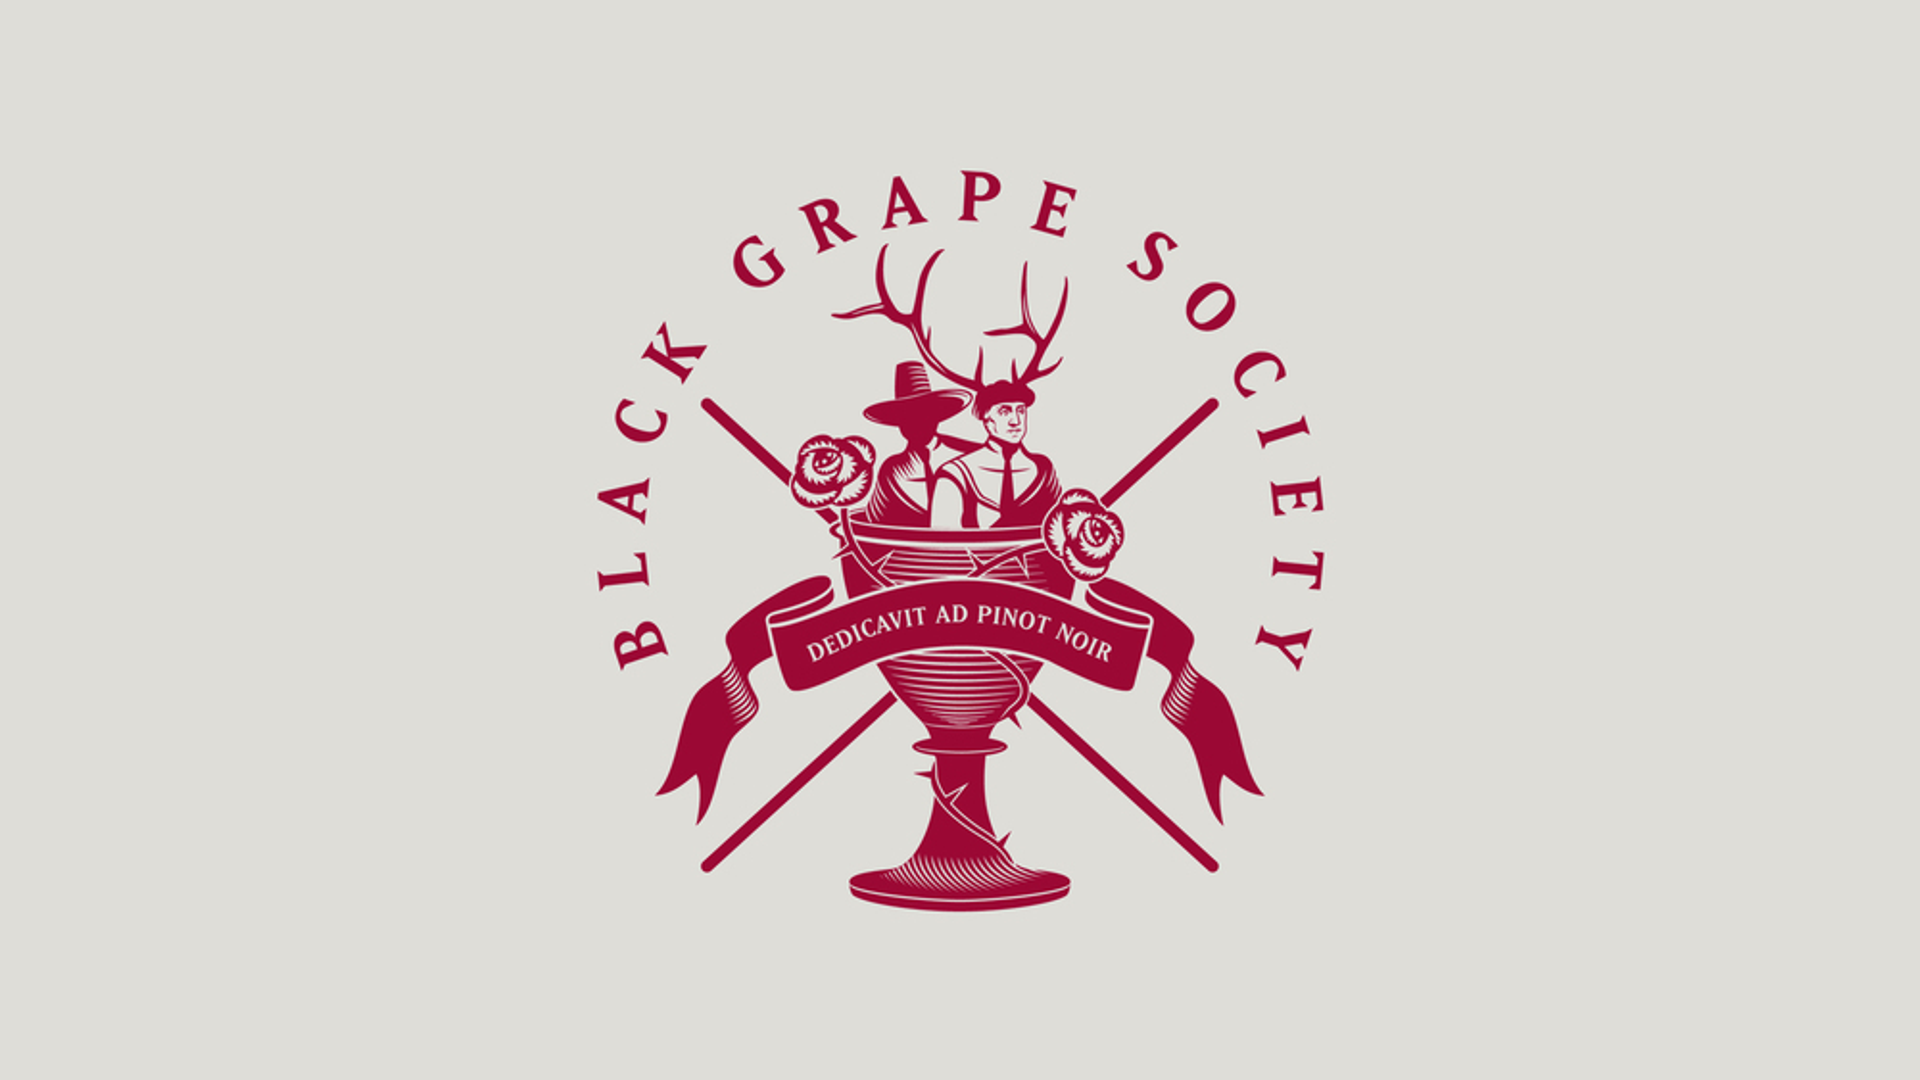 Featured image for Black Grape Society